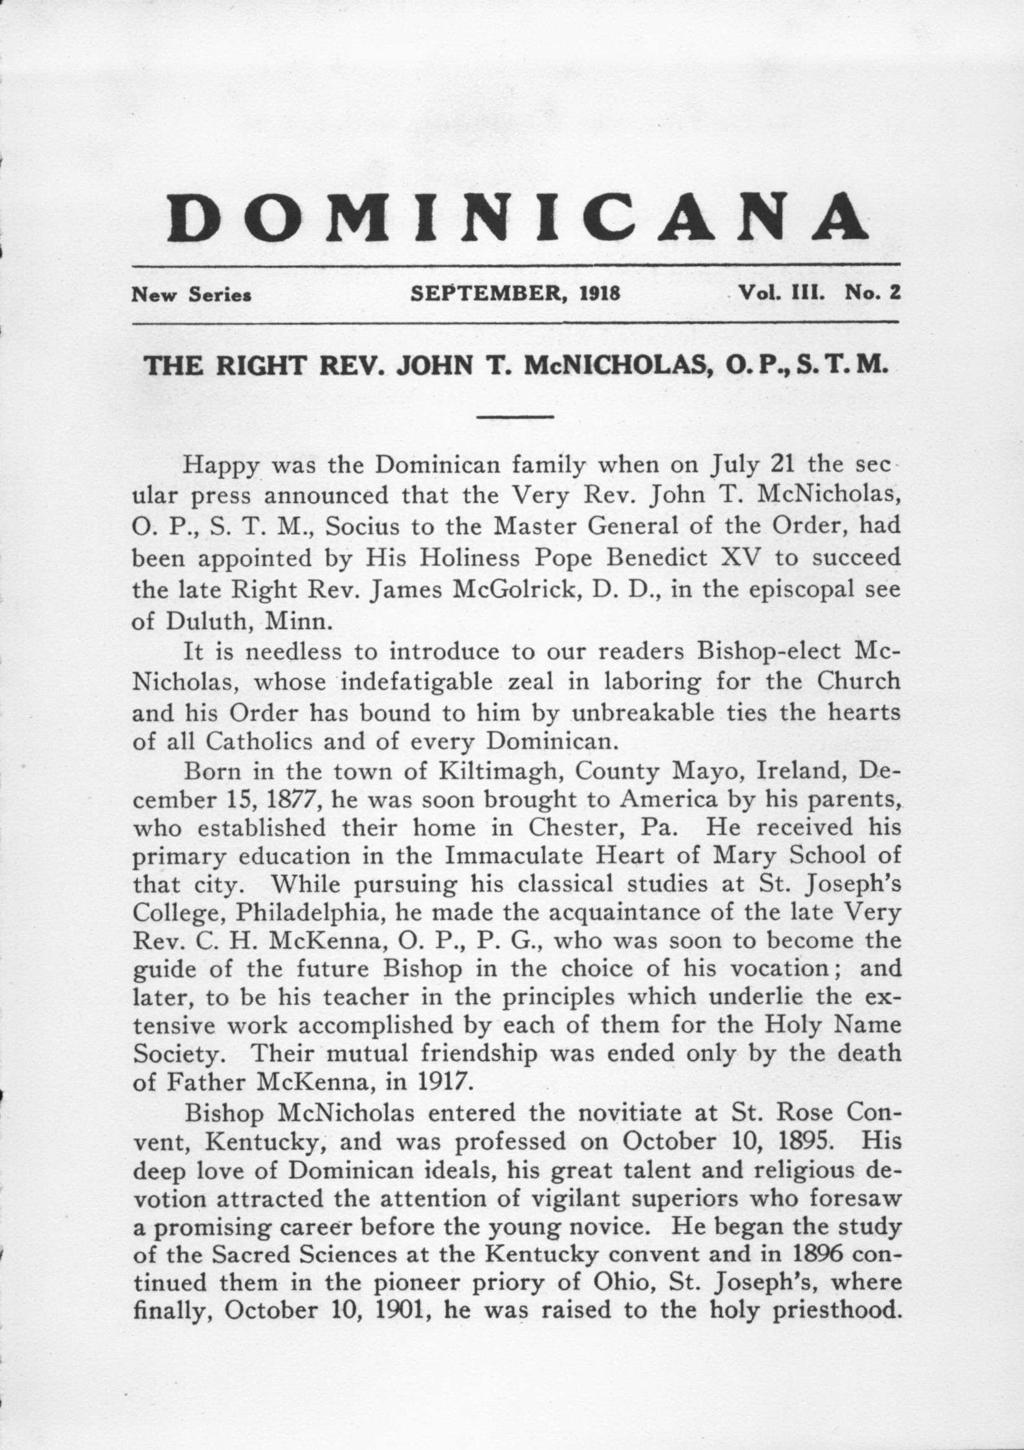 DOMINICAN A New Seriea SEPTEMBER, 1918 Vol. Ill. No. Z THE RIGHT REV. JOHN T. McNICHOLAS, 0. P., S. T. M. Happy was the Dominican family when on July 21 the sec ular press announced that the Very Rev.